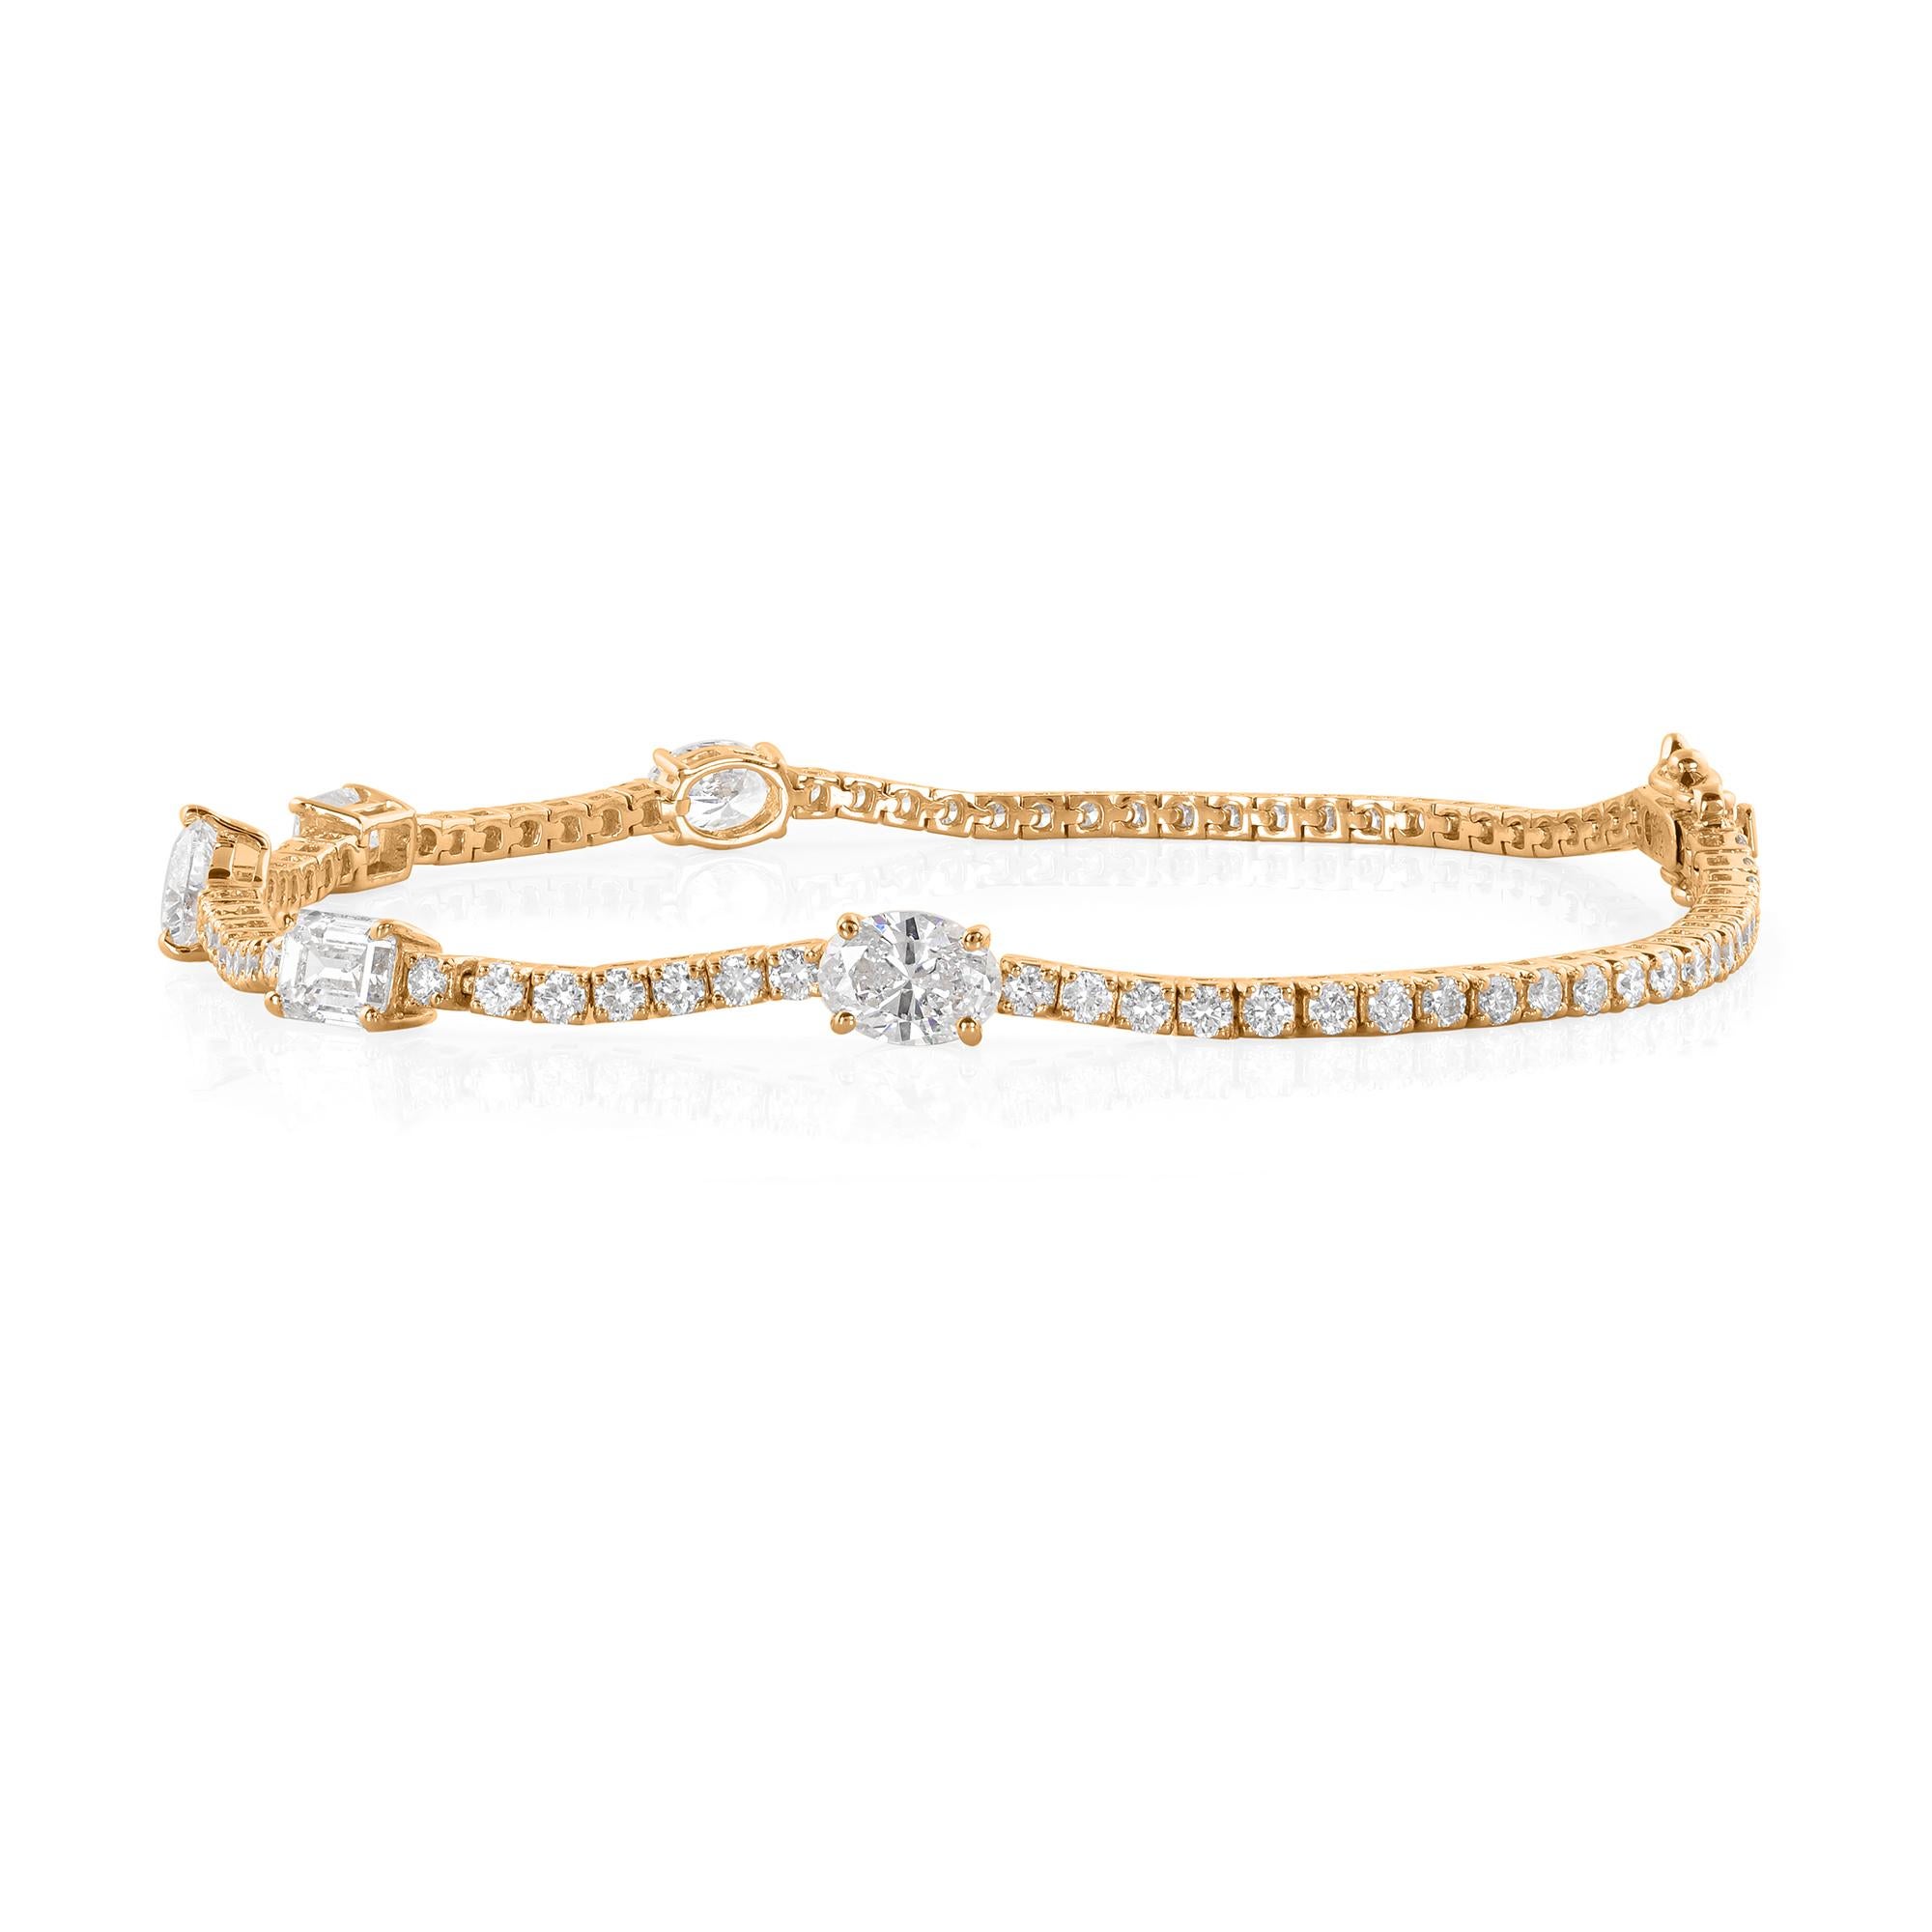 Elevate your style with the enchanting allure of this exquisite 3.64 carat Multi-Shape Diamond Bracelet, meticulously handcrafted in luxurious 14 karat yellow gold. This stunning piece of handmade jewelry celebrates the diversity and brilliance of